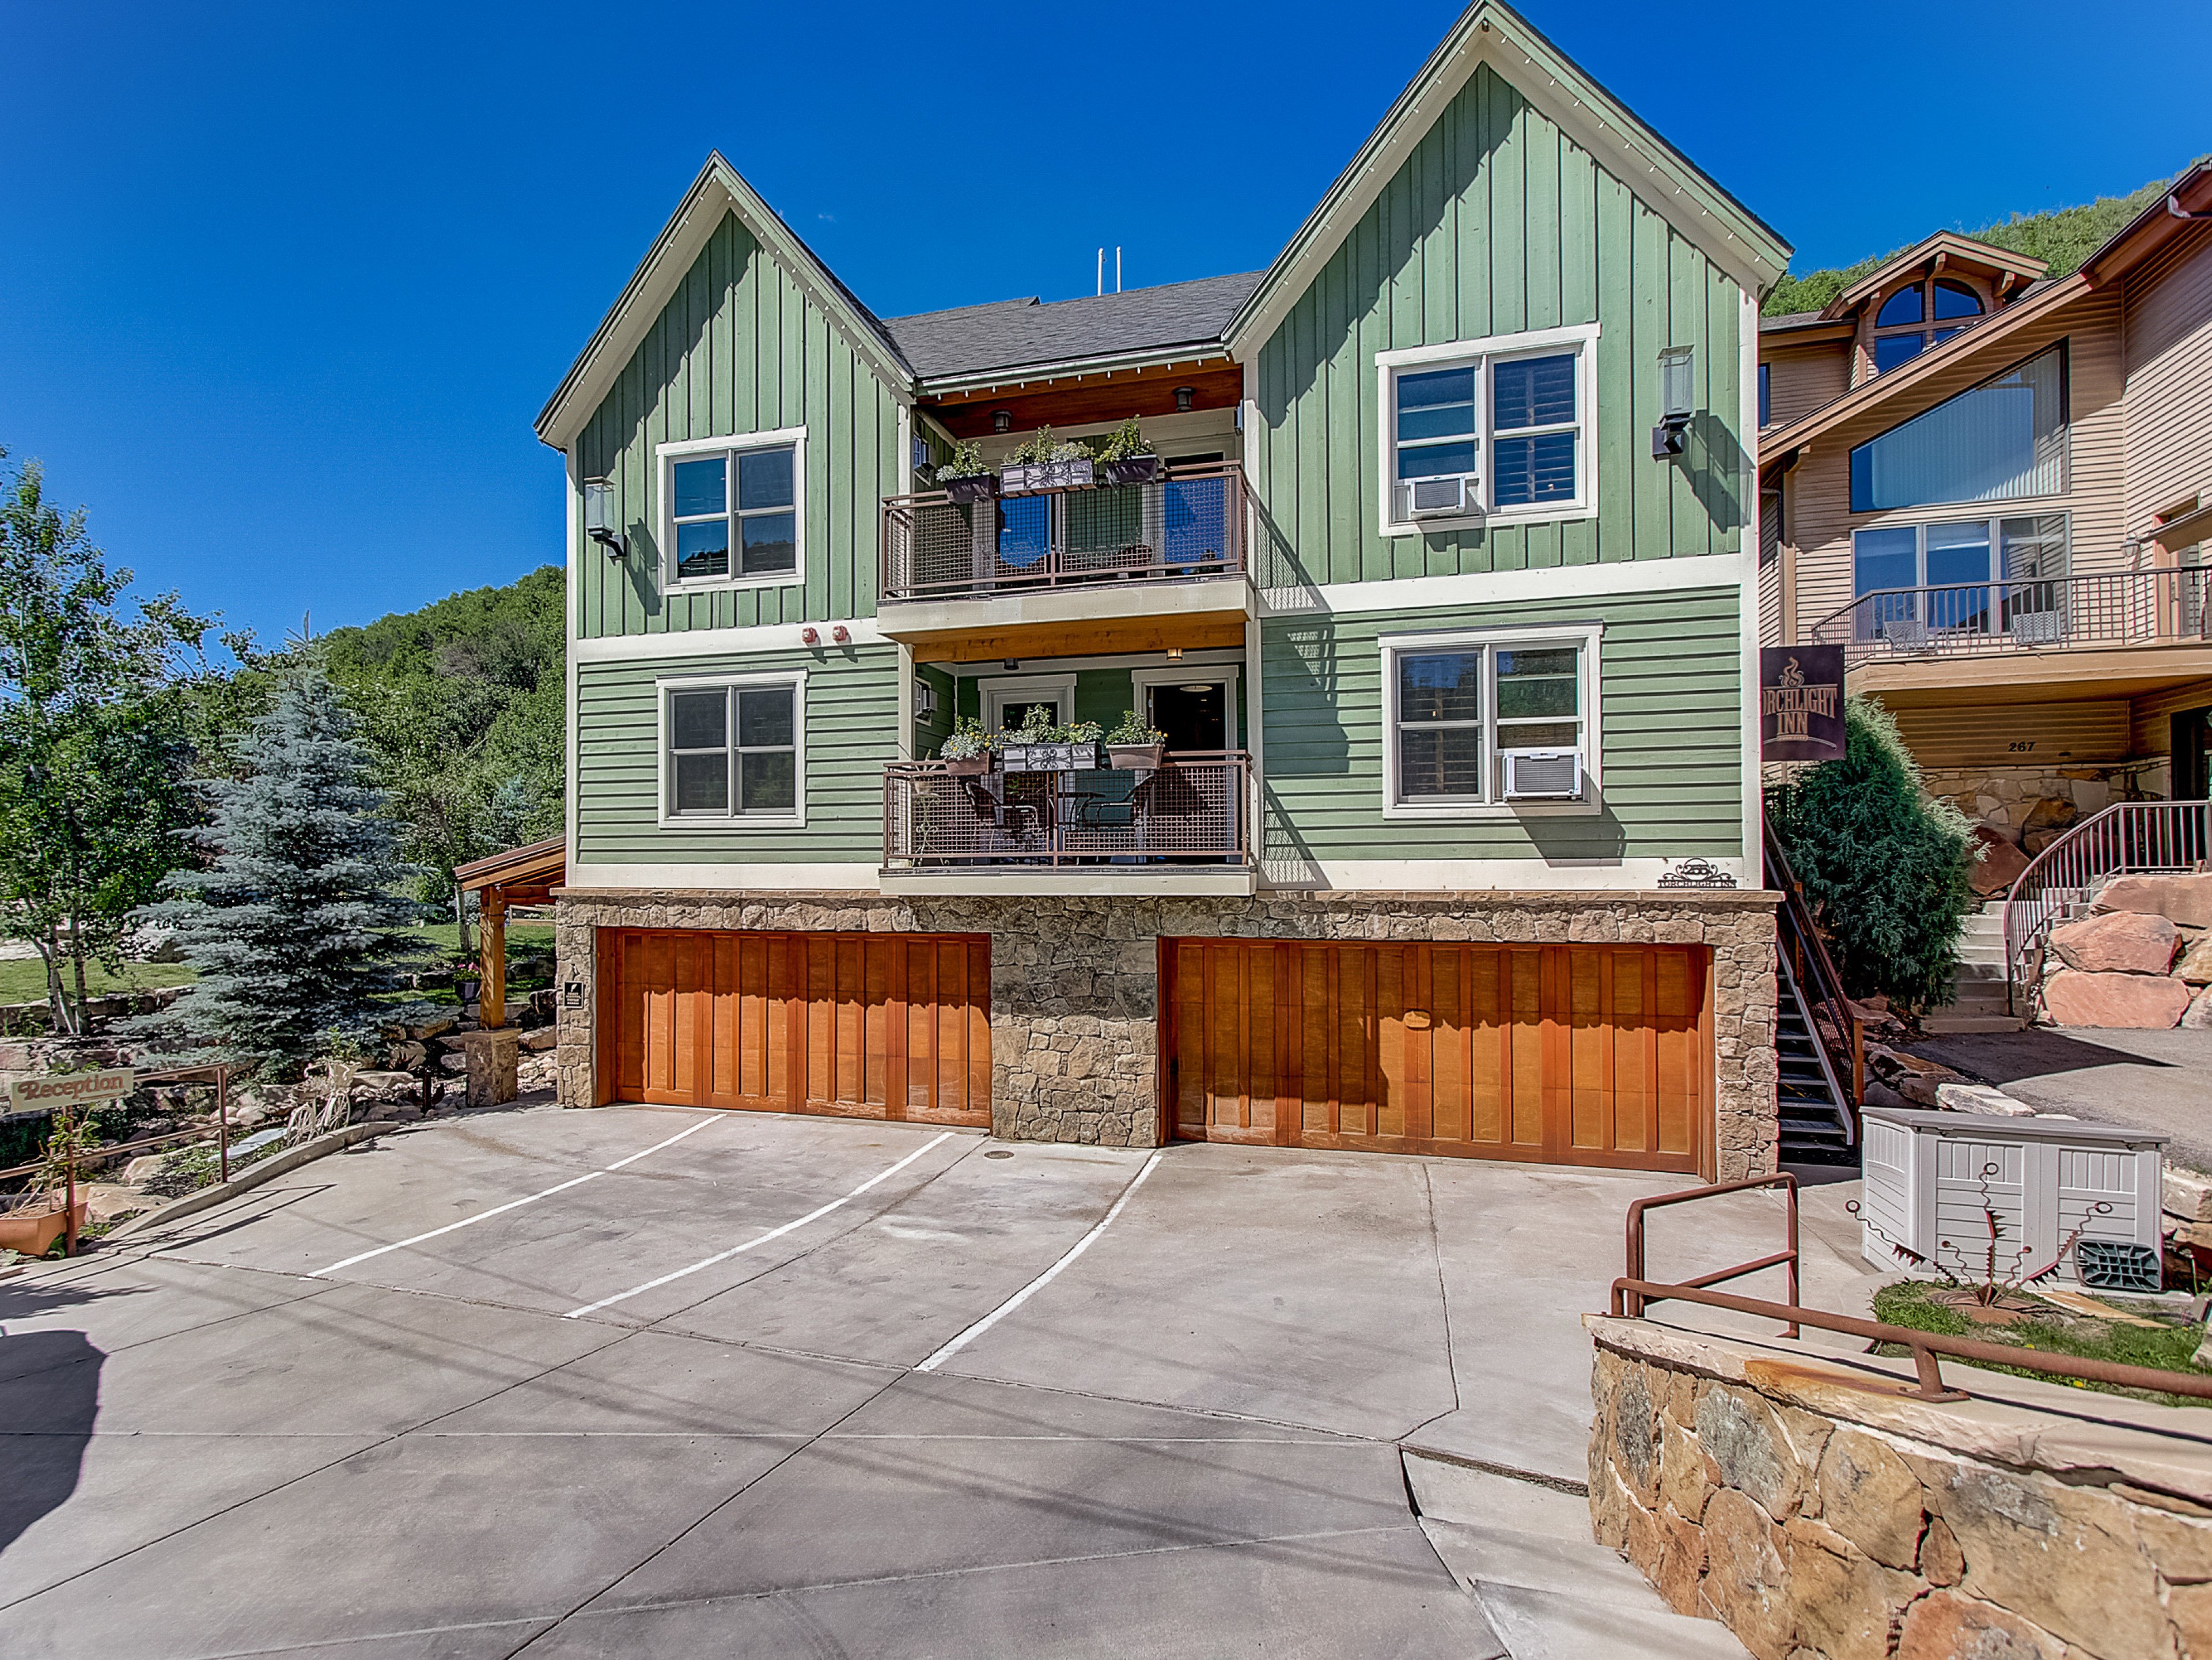 Park City 162 Utah vacation rentals for large groups